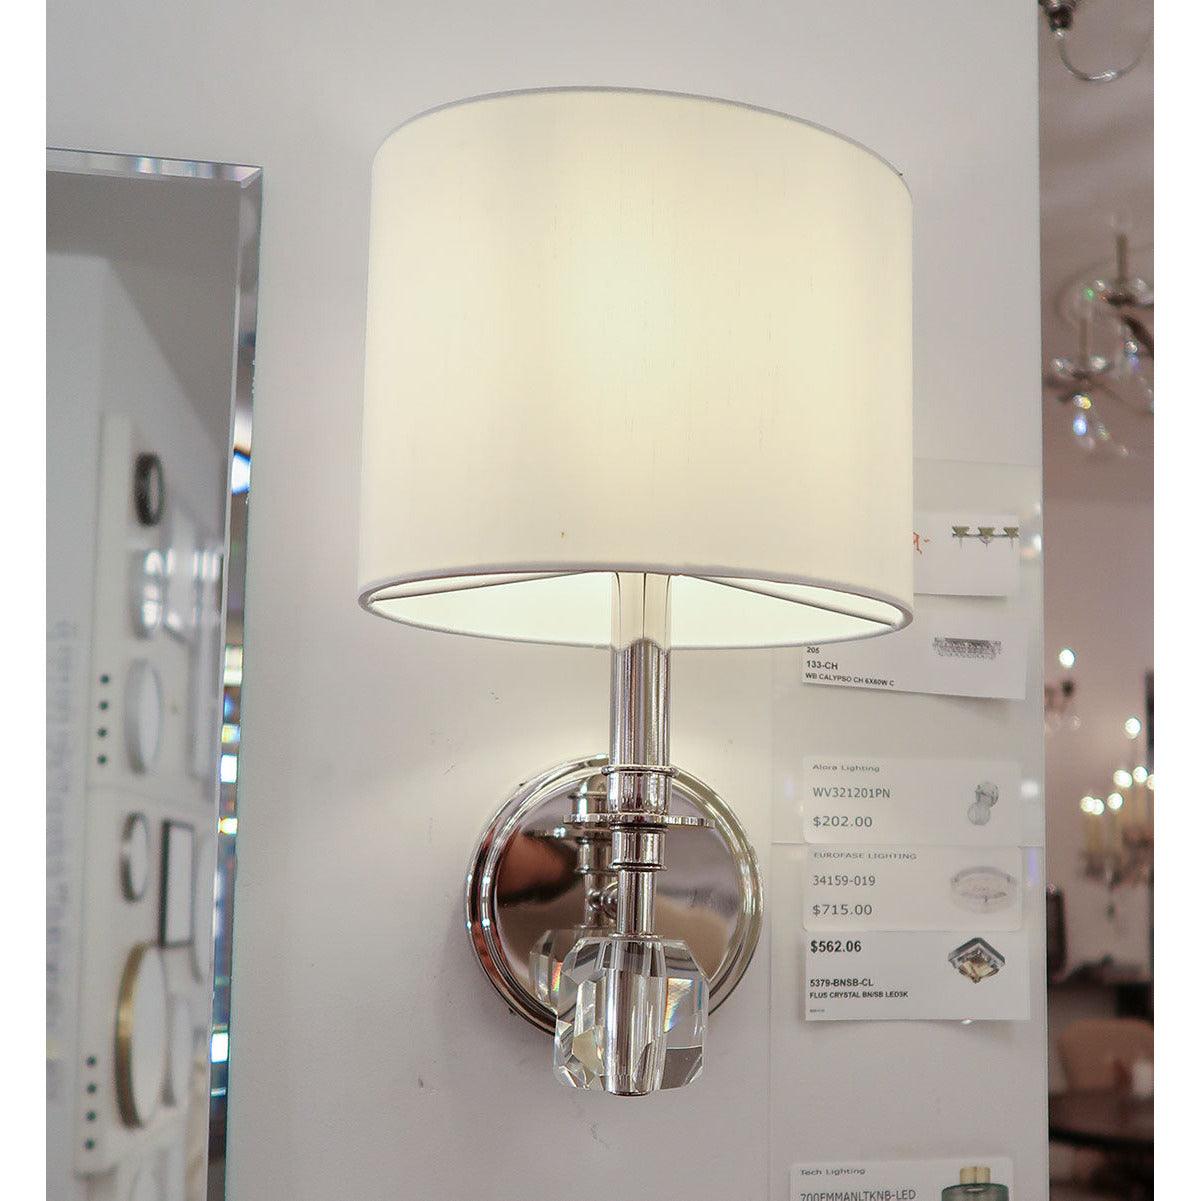 Montreal Lighting & Hardware - Chimes One Light Wall Mount by Crystorama | Open Box - CHI-211-PN-OB | Montreal Lighting & Hardware